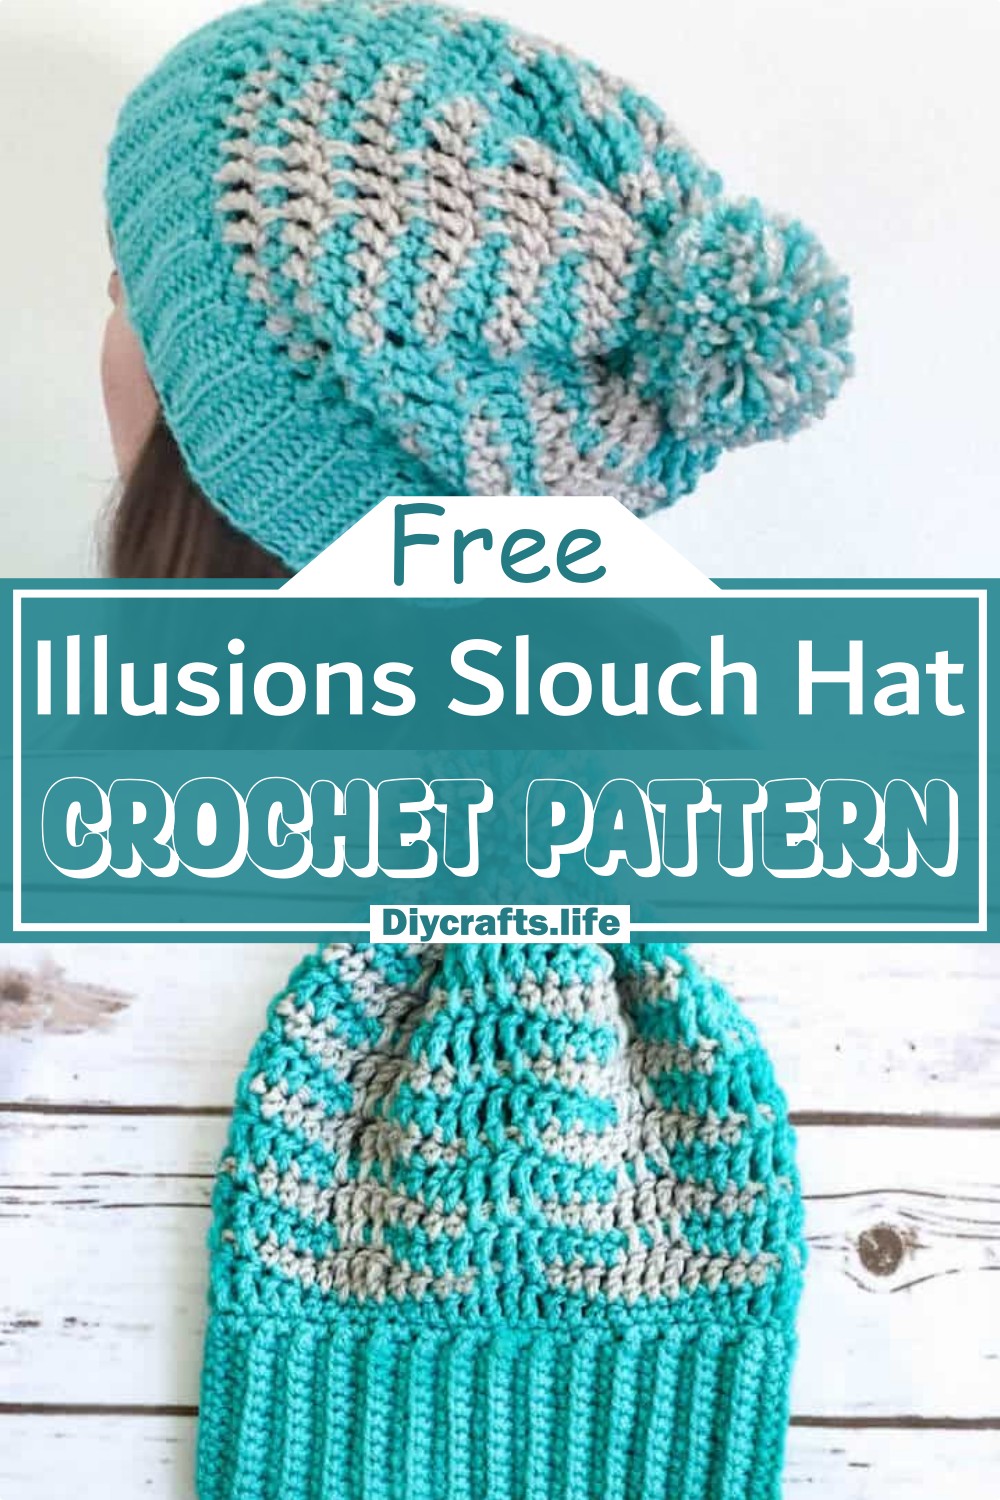 Illusions Slouch Crochet Hat Free Pattern